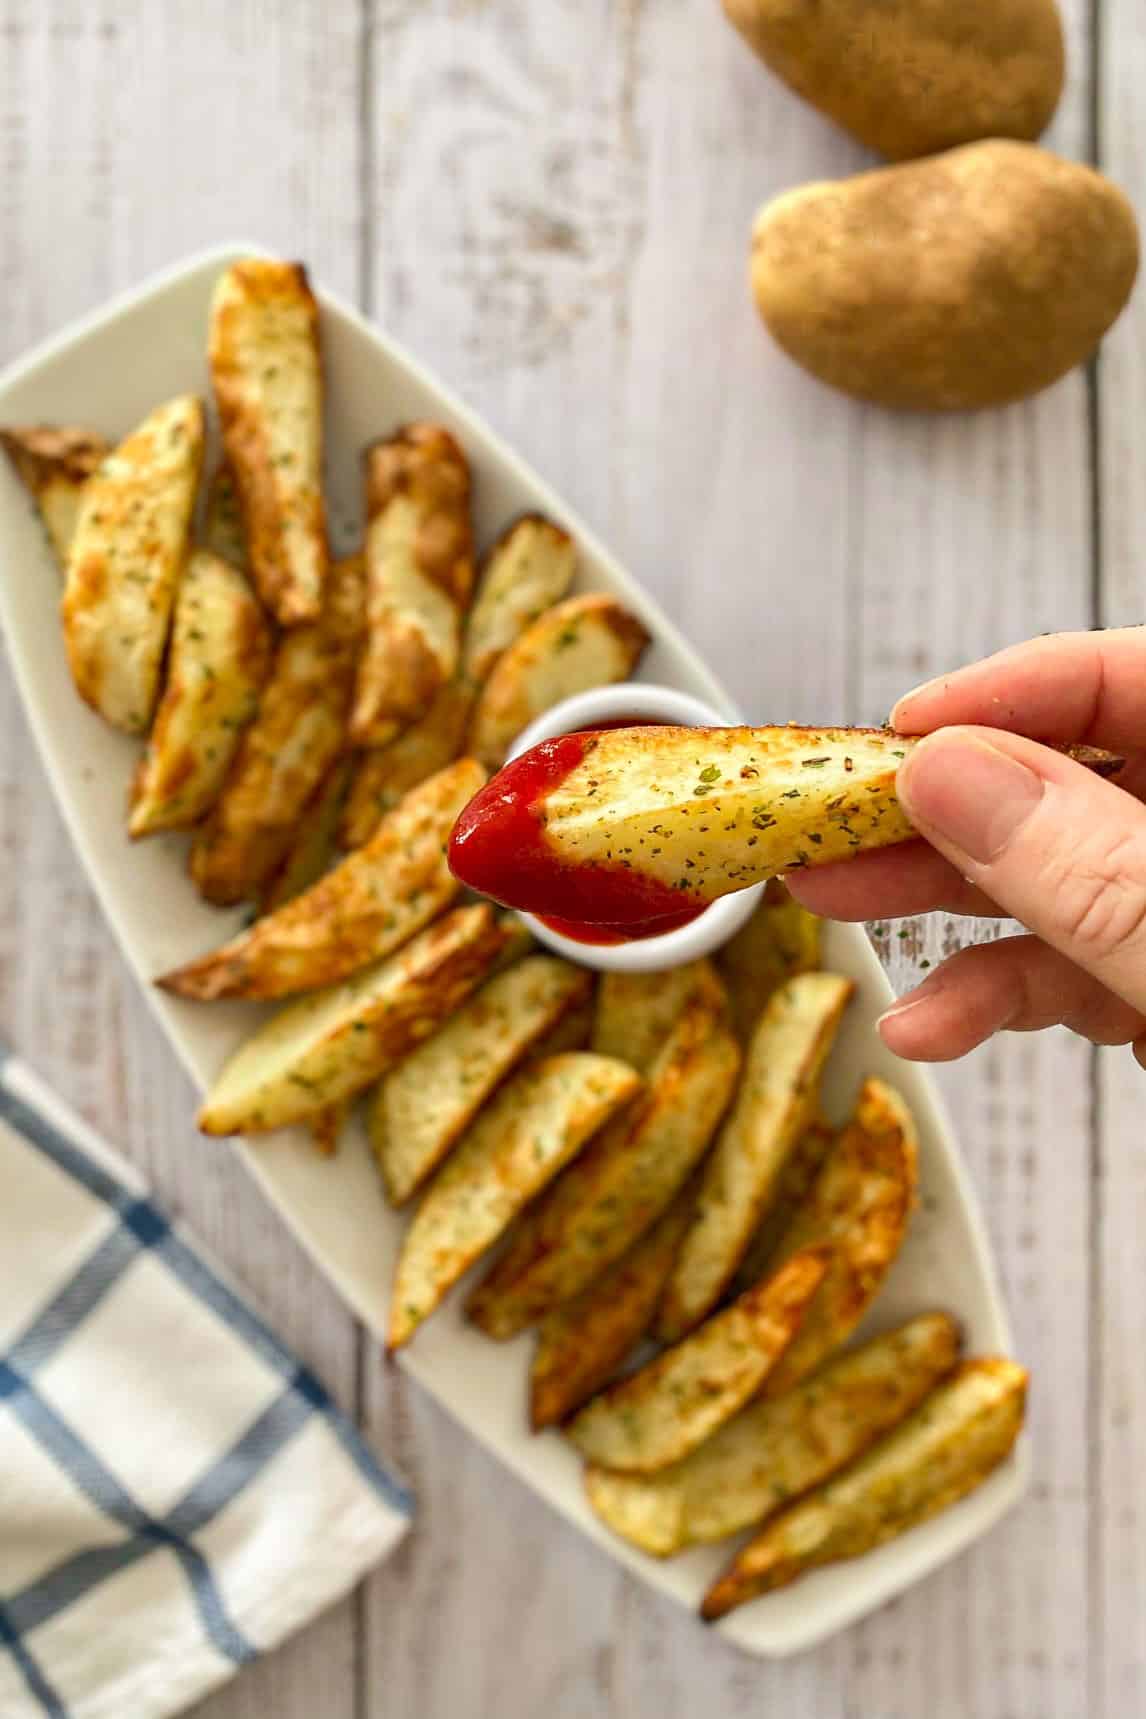 Hand holding up potato wedge dipped in ketchup with more wedges below in platter.